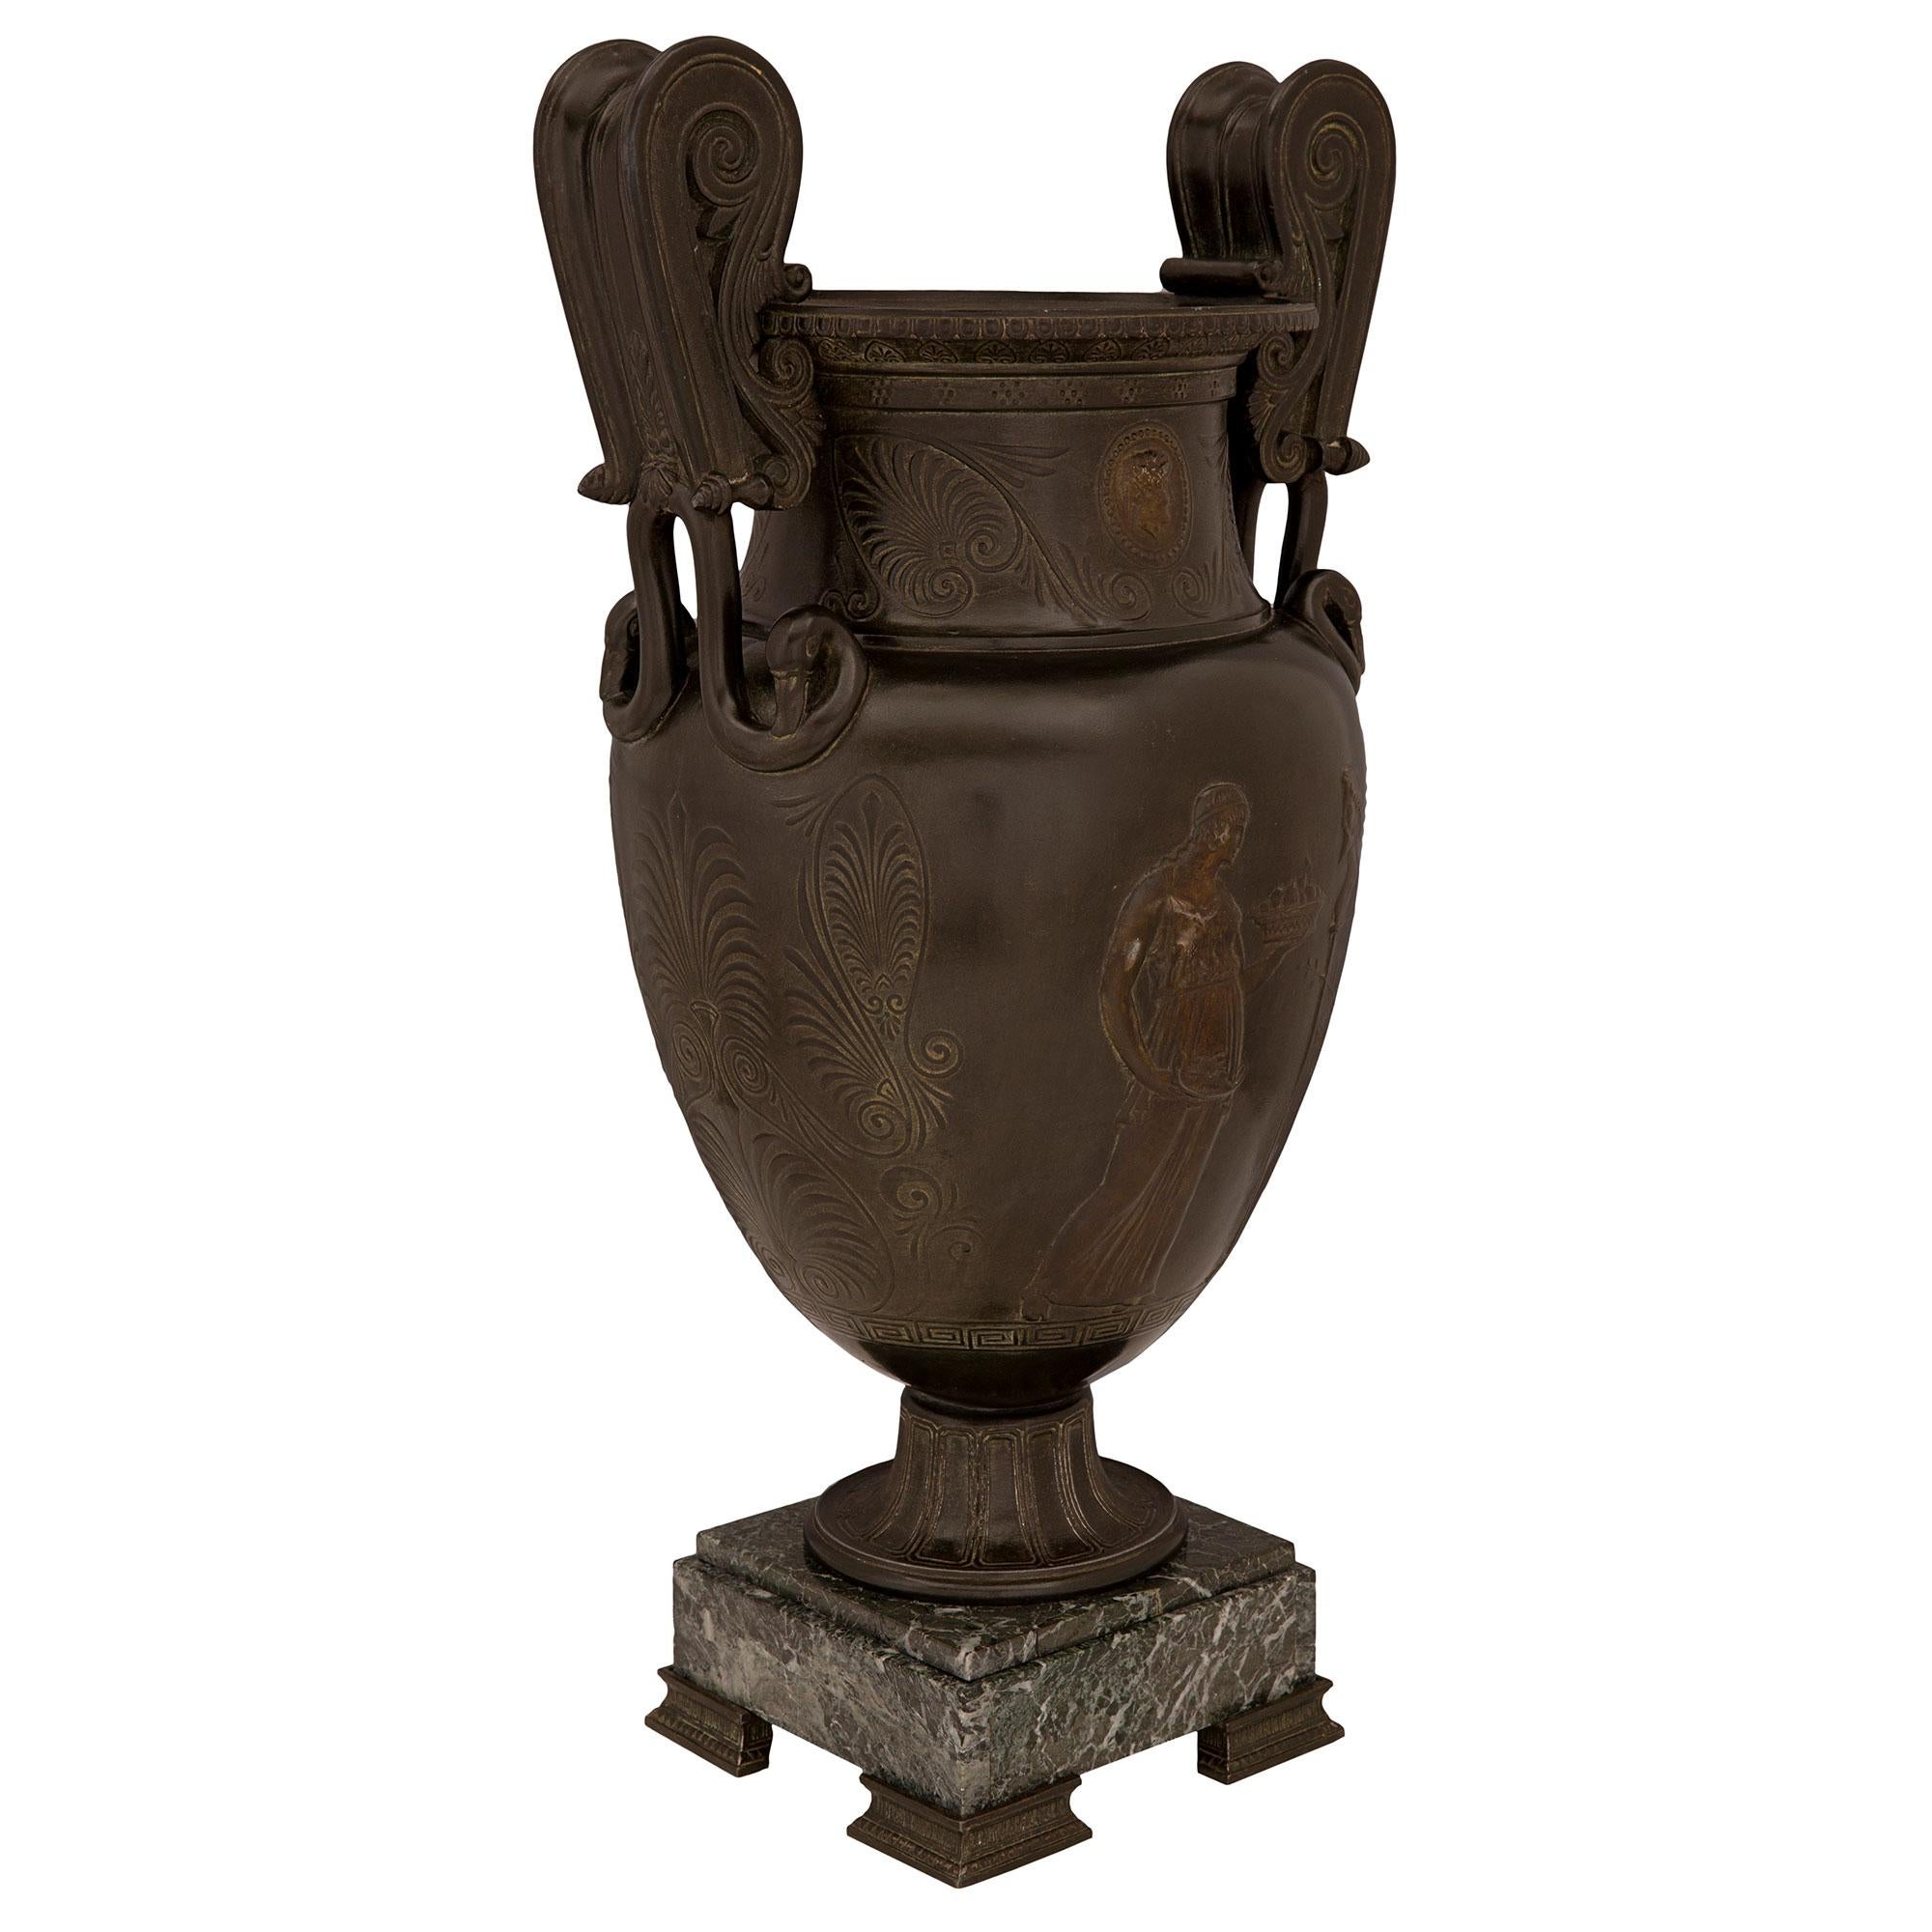 A handsome French 19th century Grand Tour period patinated bronze and Vert de Patricia marble urn. The urn is raised by a square Vert de Patricia marble base with lightly curved fluted patinated bronze feet and a fine mottled border. The urn above